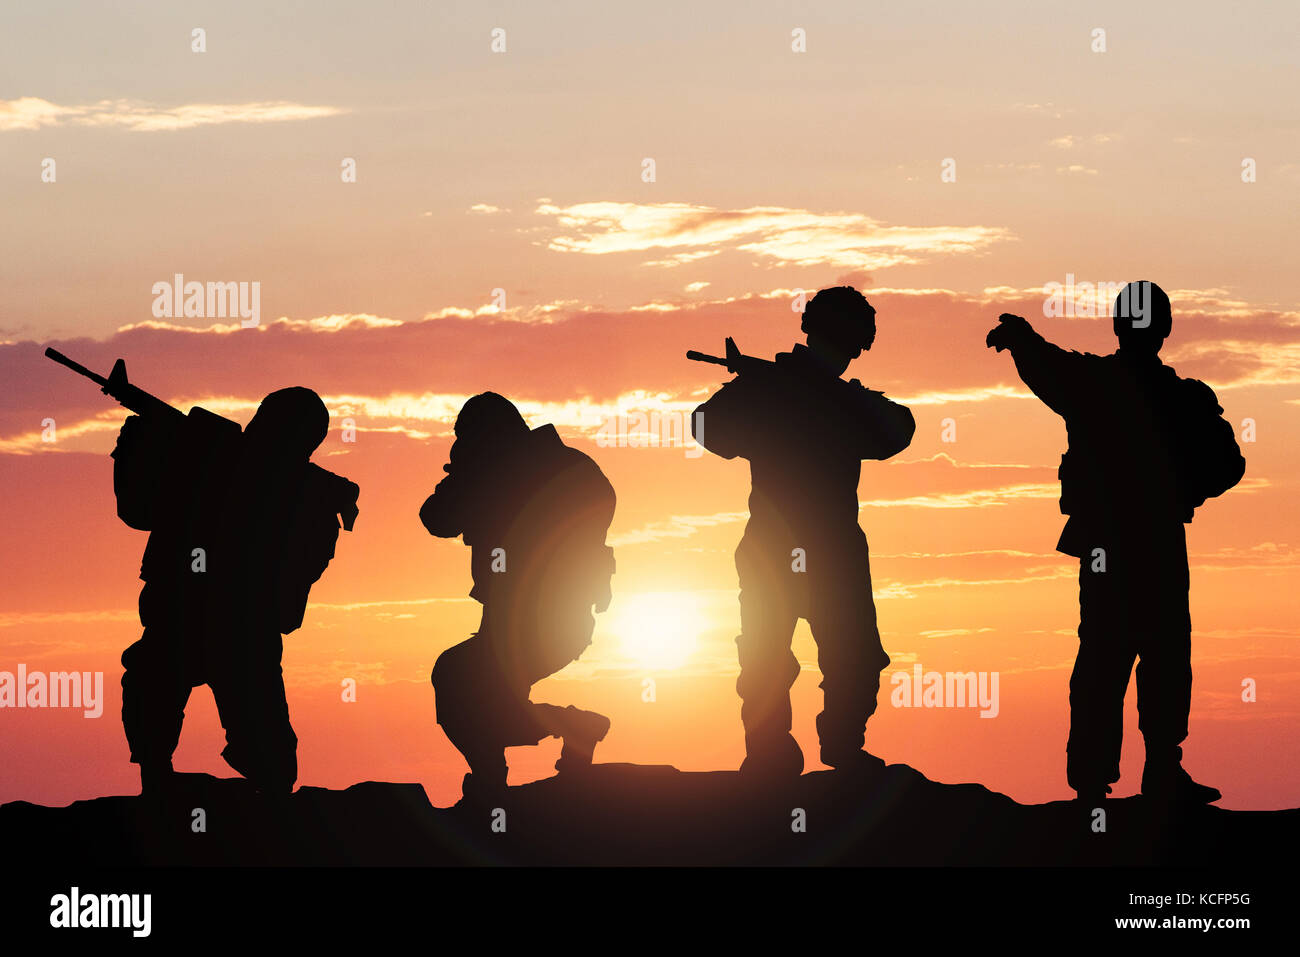 Silhouette Of Soldiers Armed With Weapons Against Climatic Sky On Battlefield Stock Photo